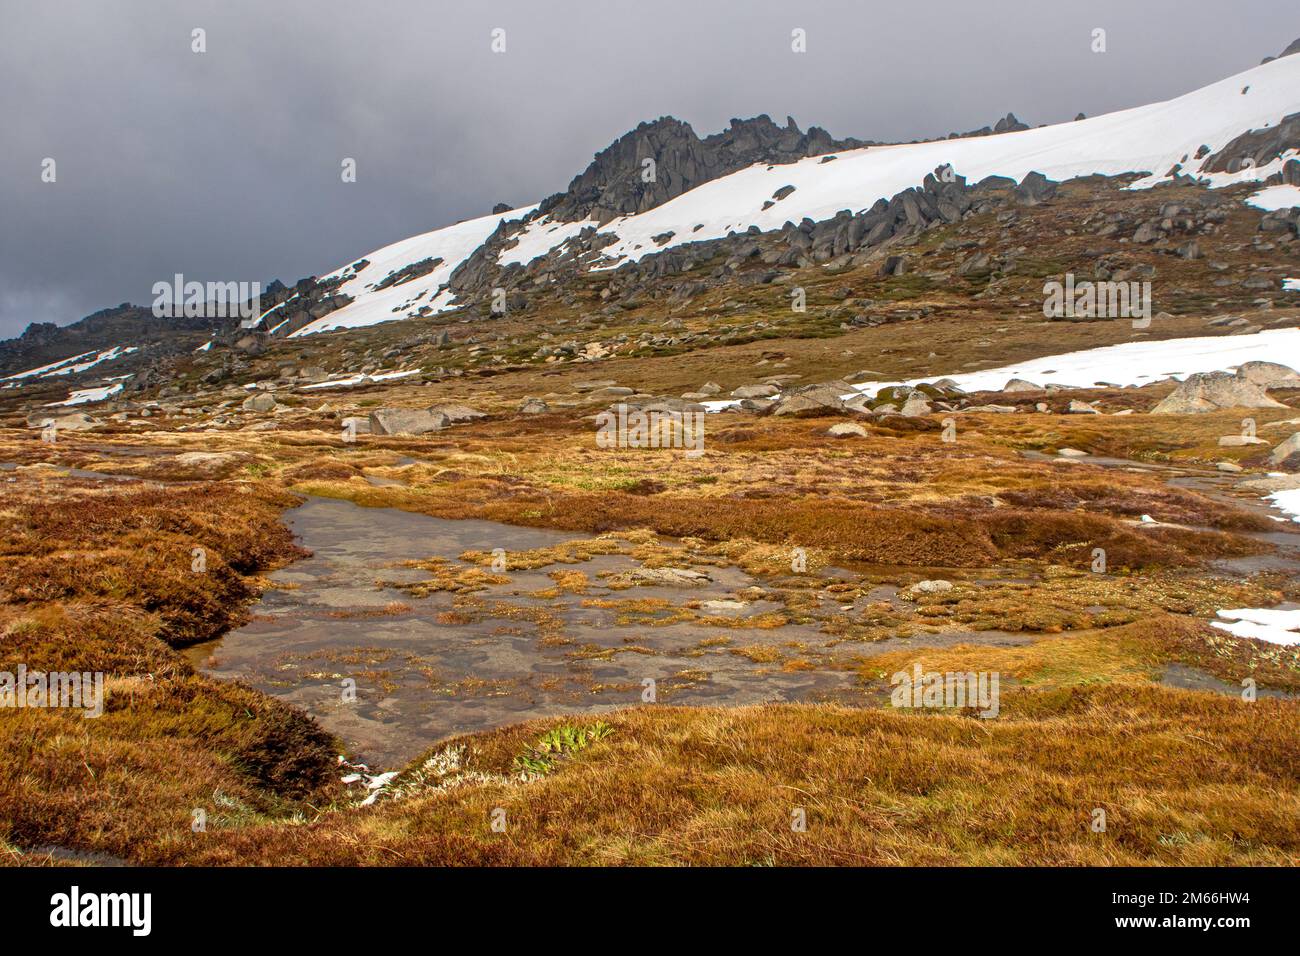 The Ramshead Range rising above a tarn in the Snowy Mountains Stock Photo